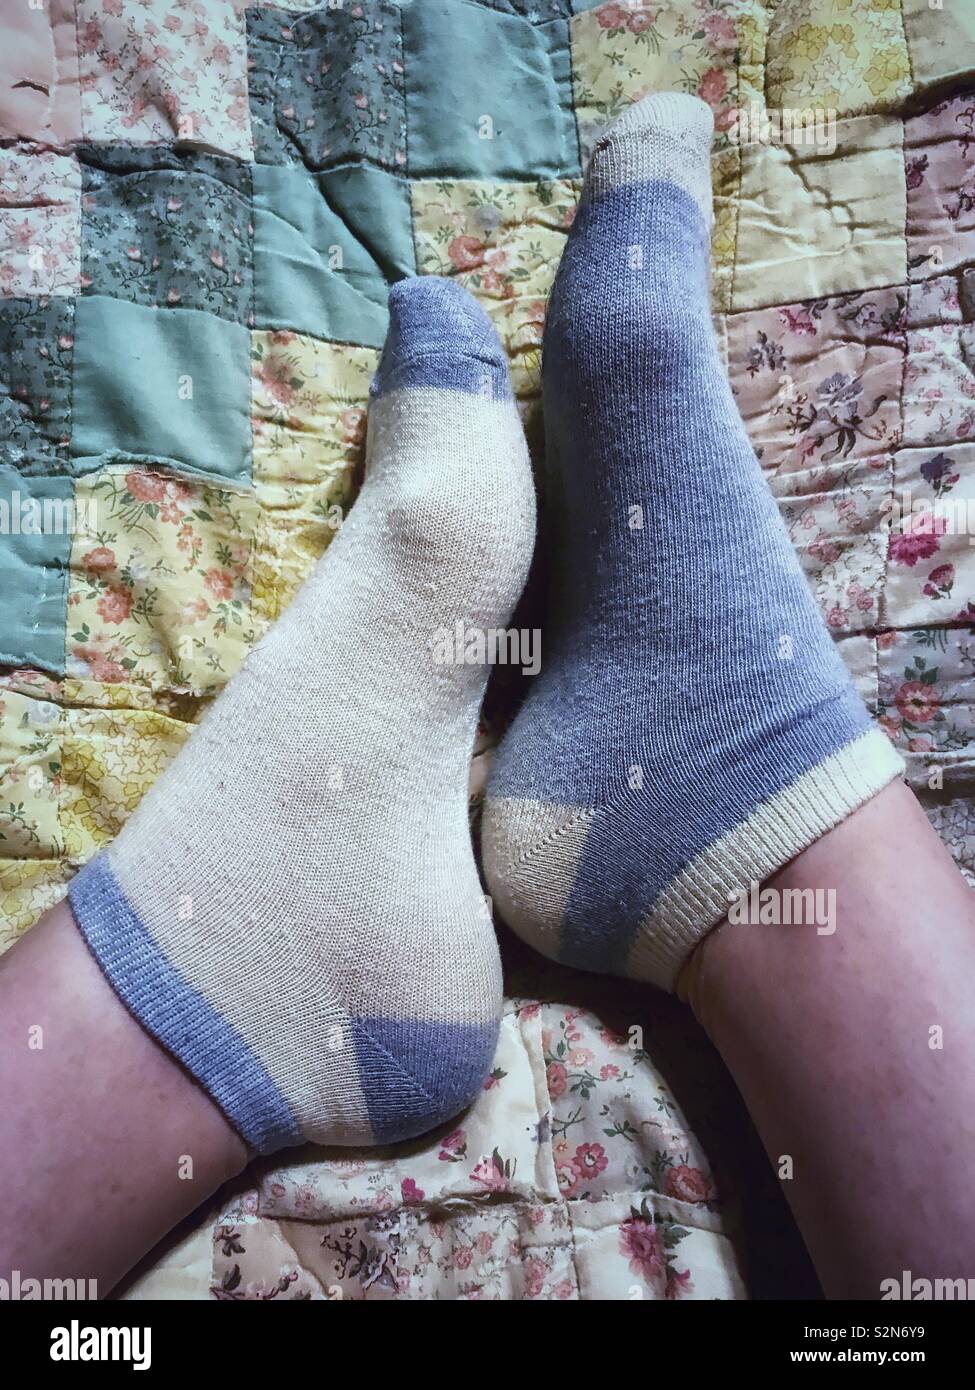 Complementary, but not perfectly matched ankle socks on two feet Stock  Photo - Alamy